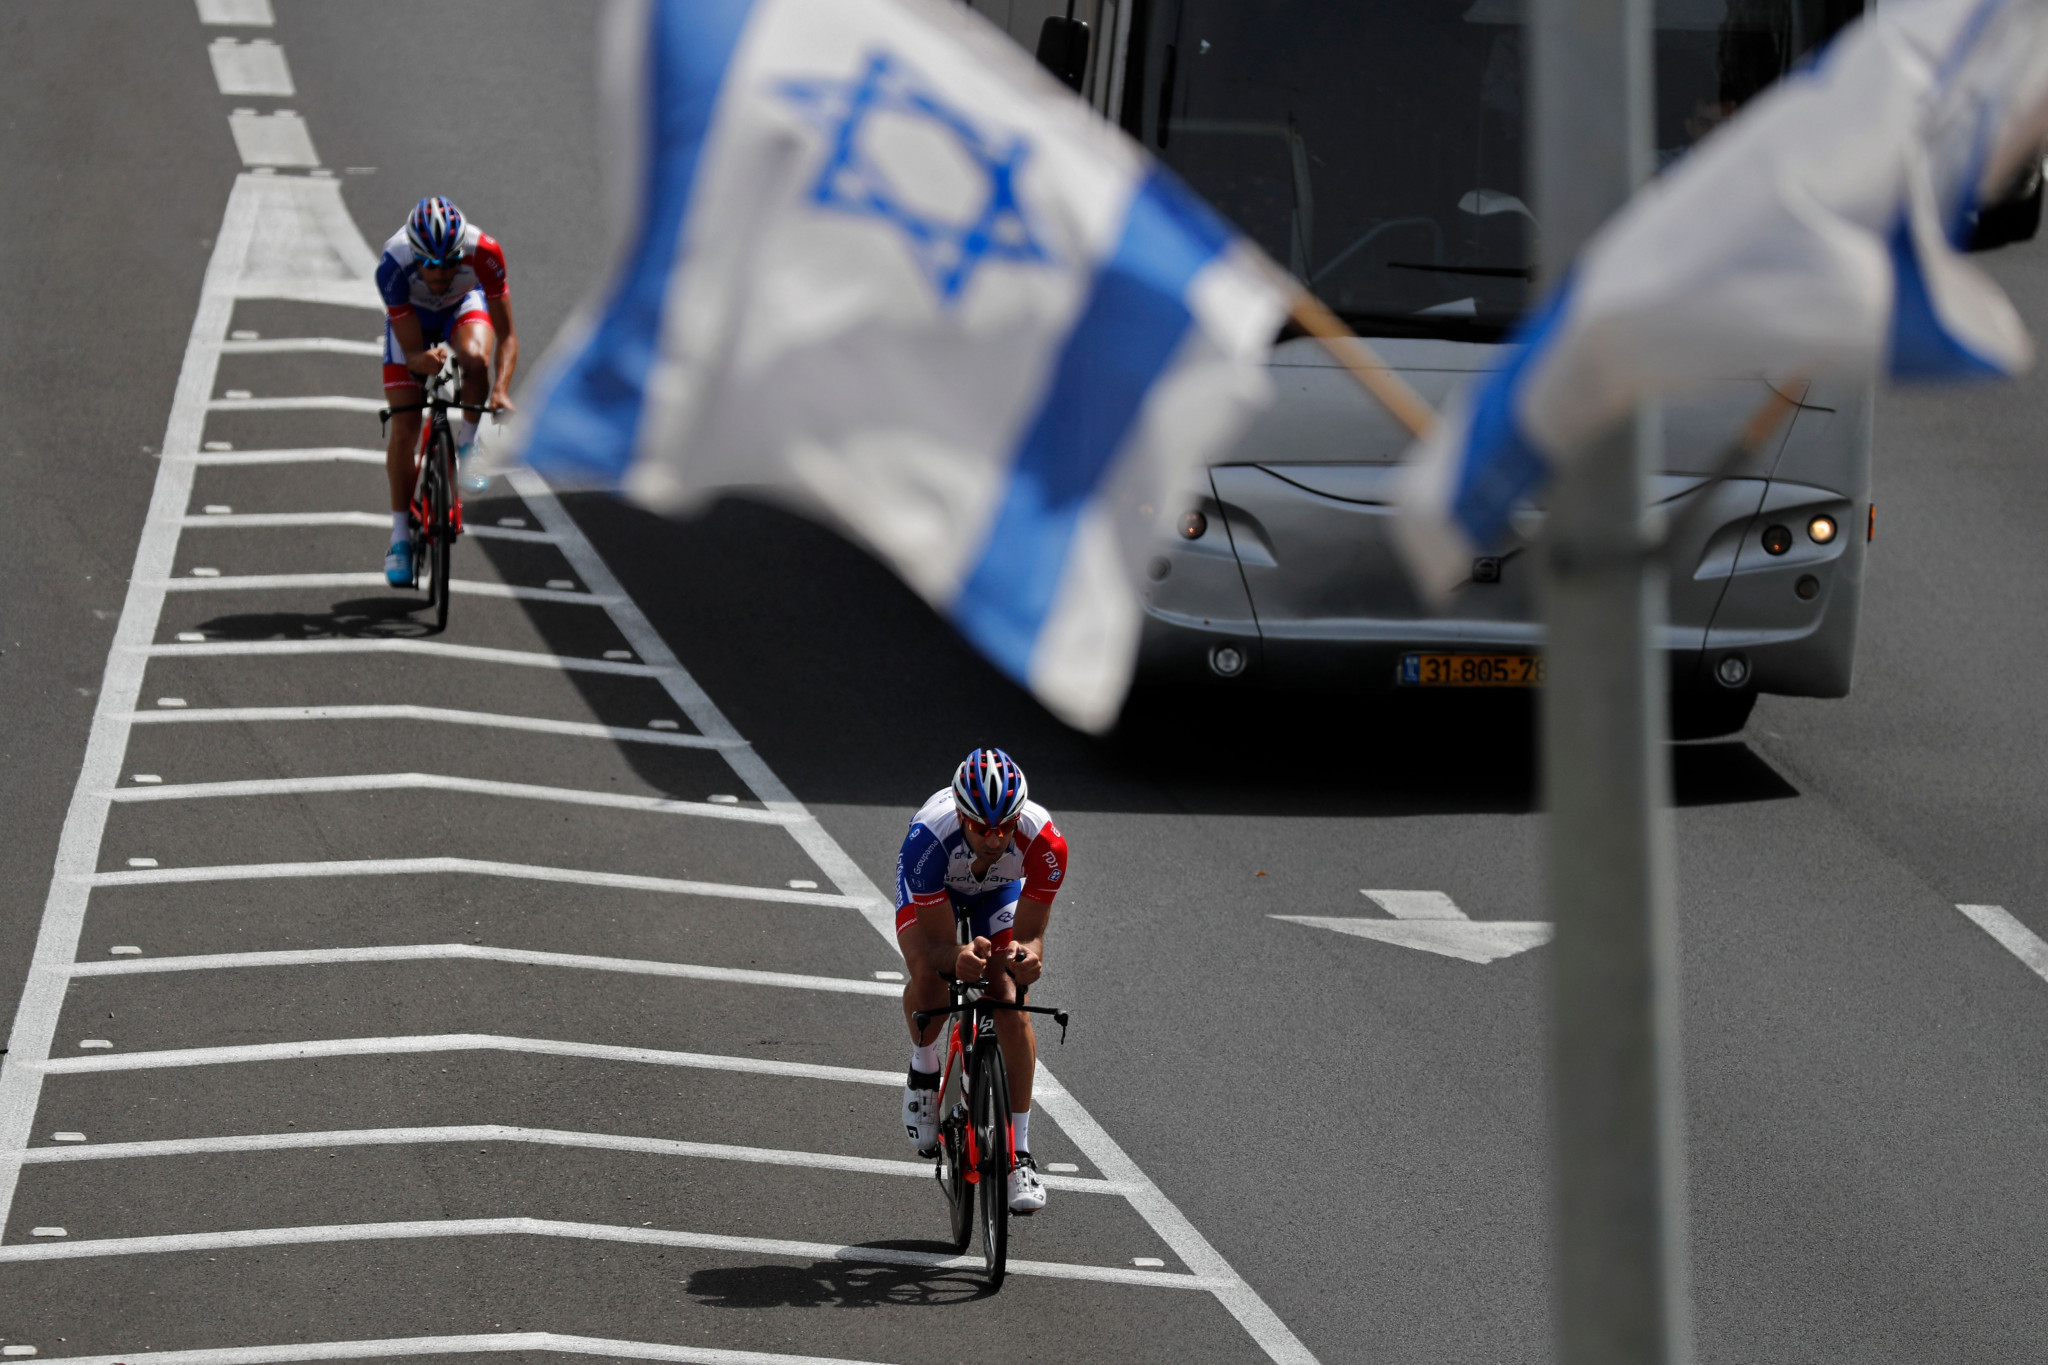 Jerusalem is set to stage the Big Start of the Giro d'Italia amid controversy ©Getty Images